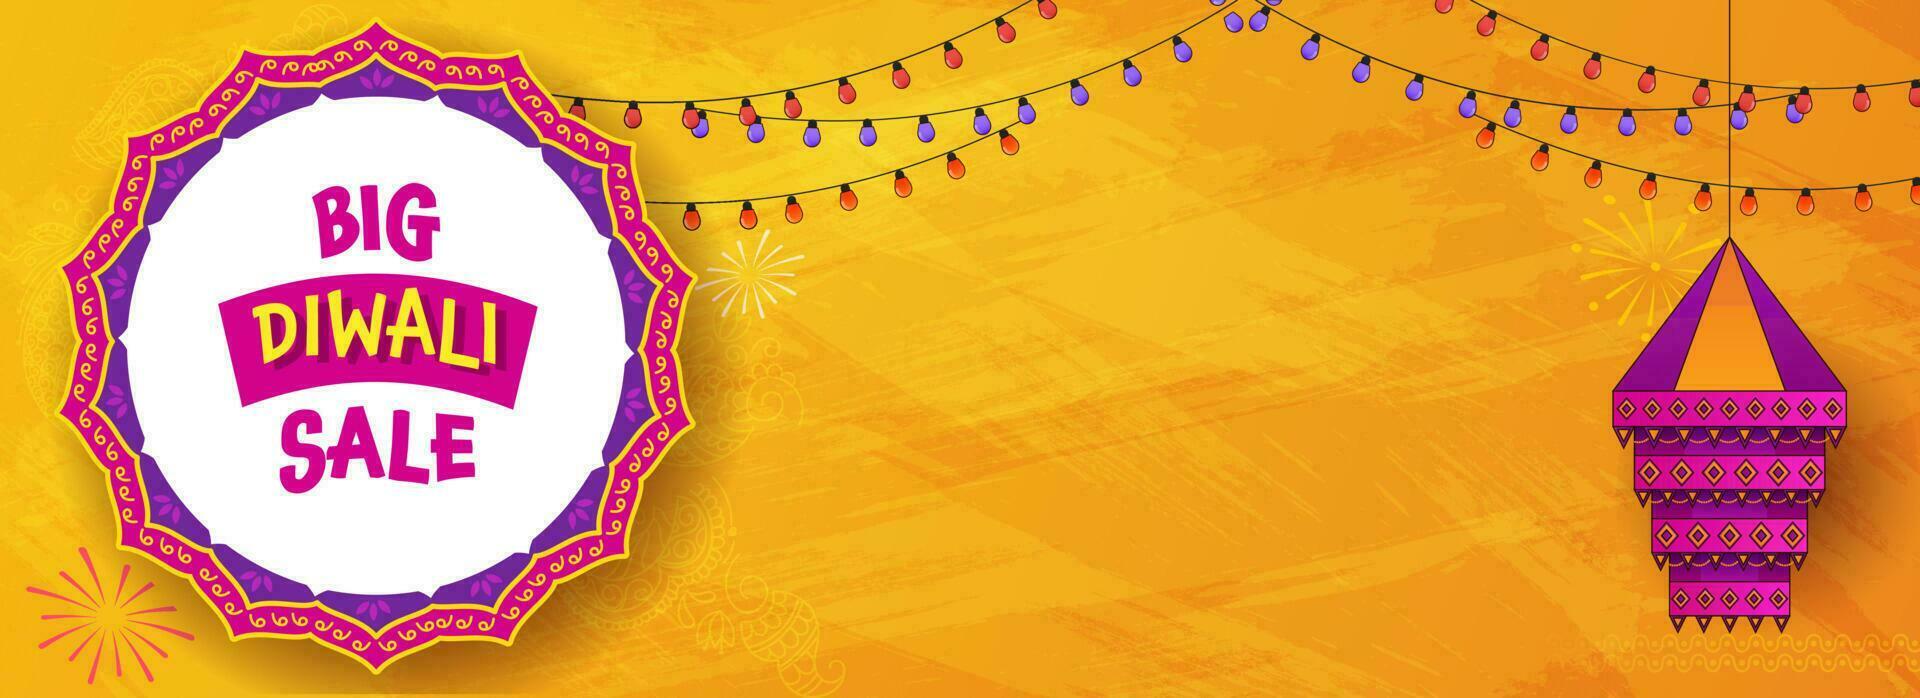 Diwali Big Sale Banner Or Header Design With Traditional Lantern And Lighting Garland On Chrome Yellow Background. vector